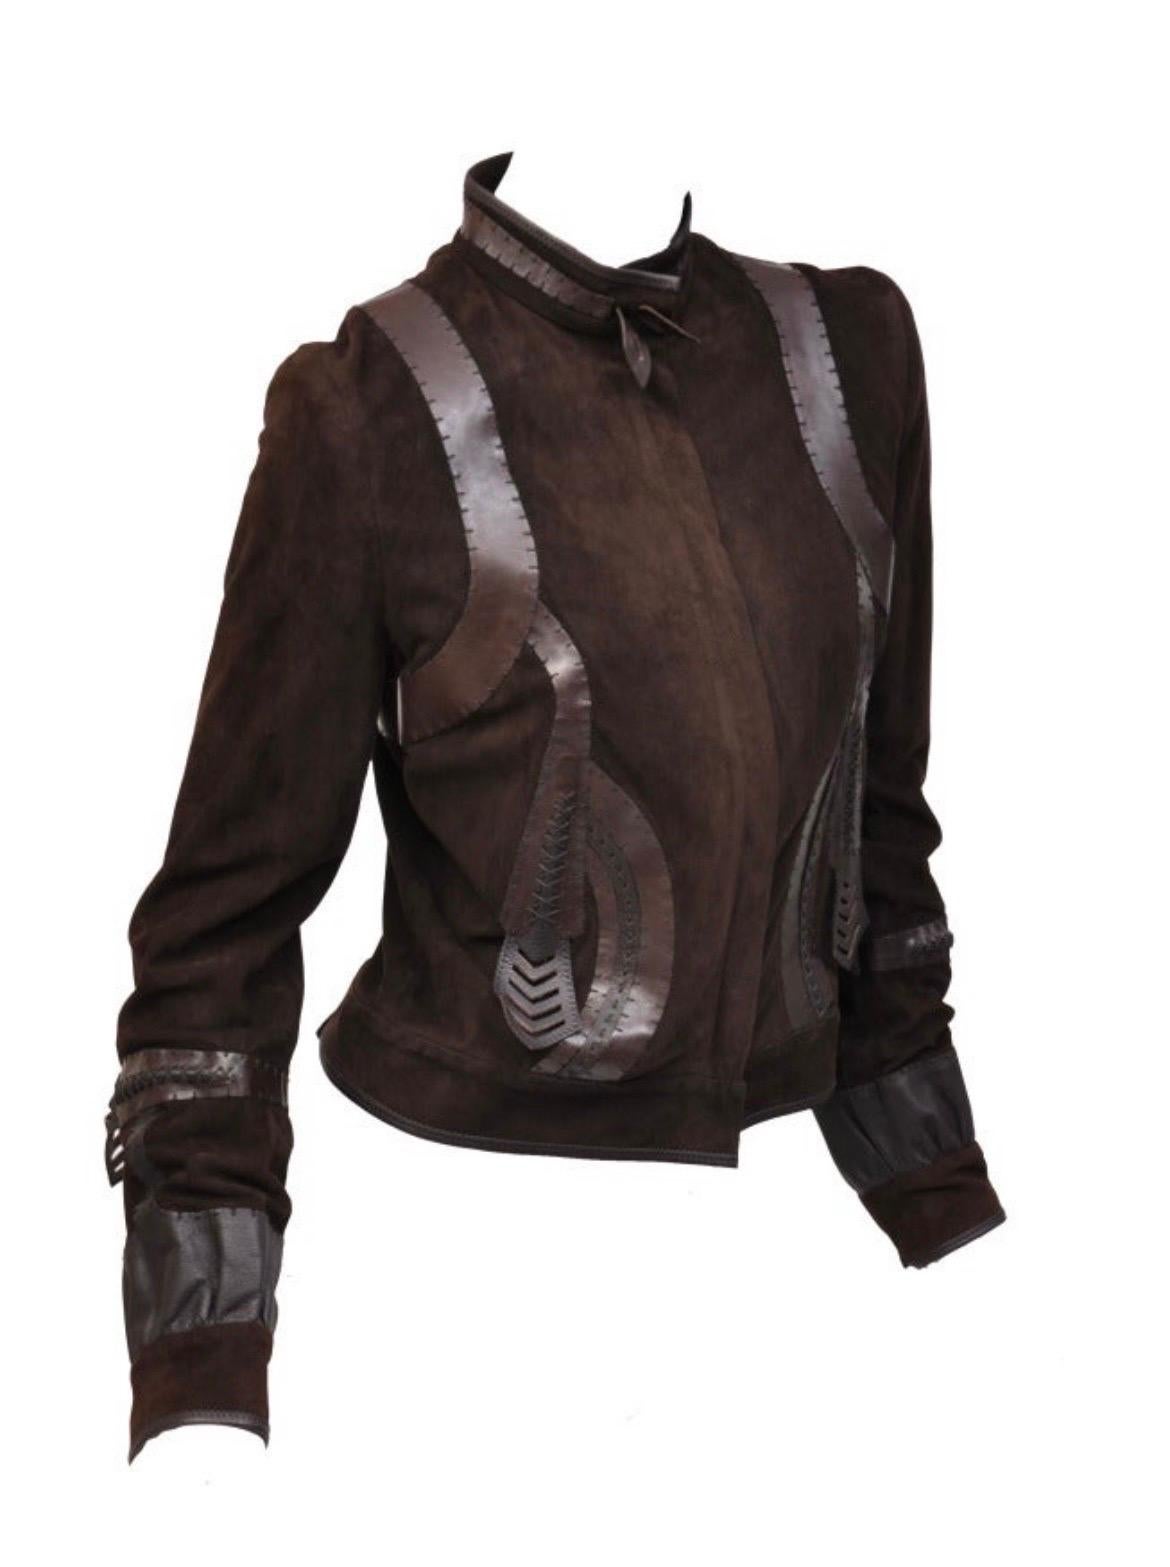 Vintage Fendi 
Embellished Leather Jacket
Chocolate Brown suede
Red Chiffon Silk Lining
IT Size 40 - US 4
Made in Italy
Brand new, with tags
Pristine condition